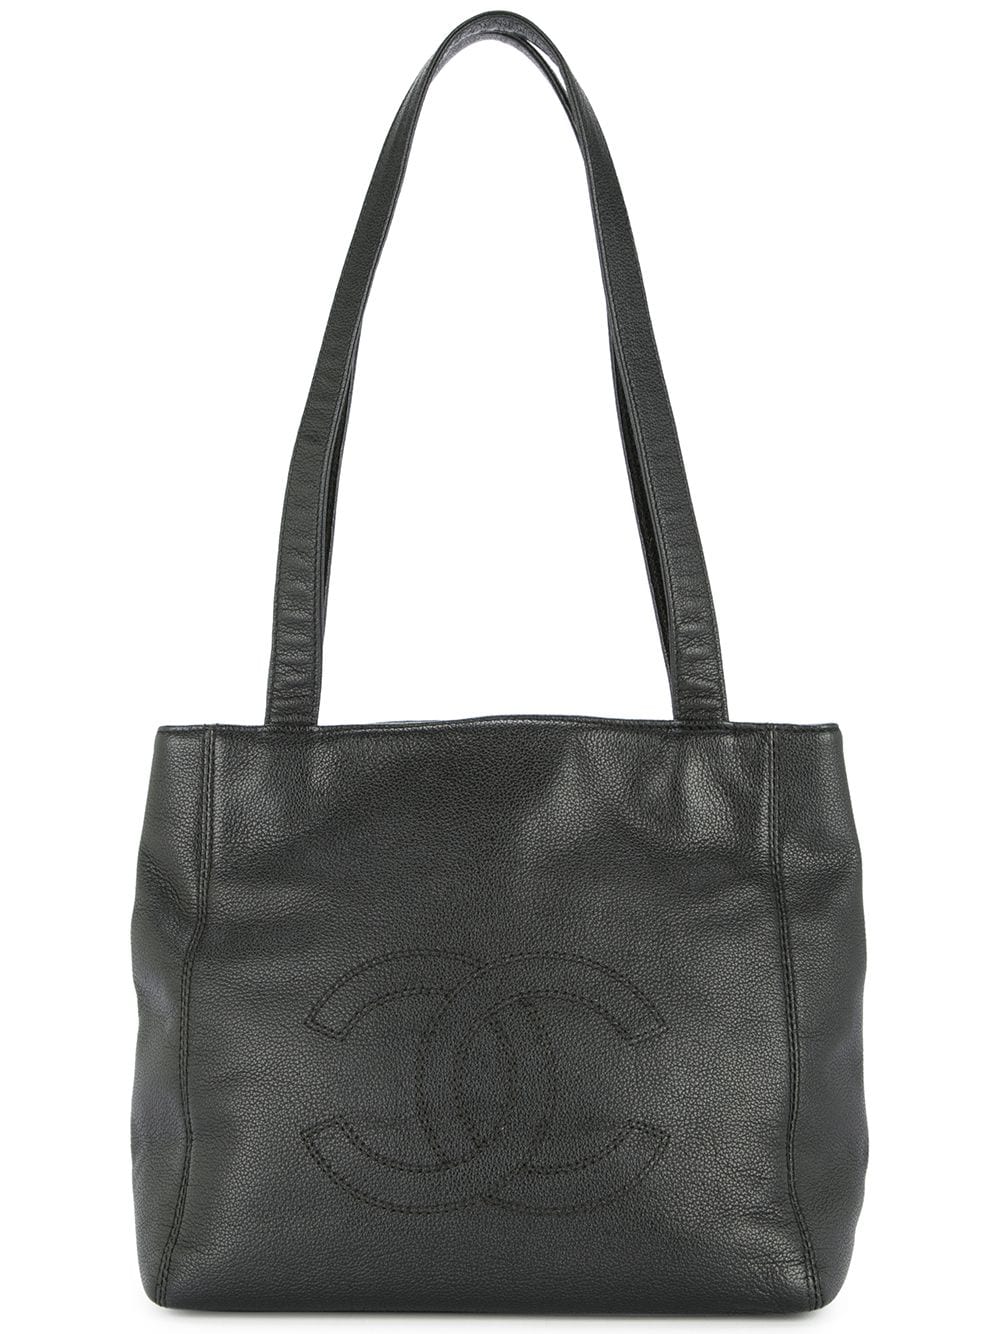 CHANEL Pre-Owned 1997-1999 Medallion Tote Bag - Farfetch